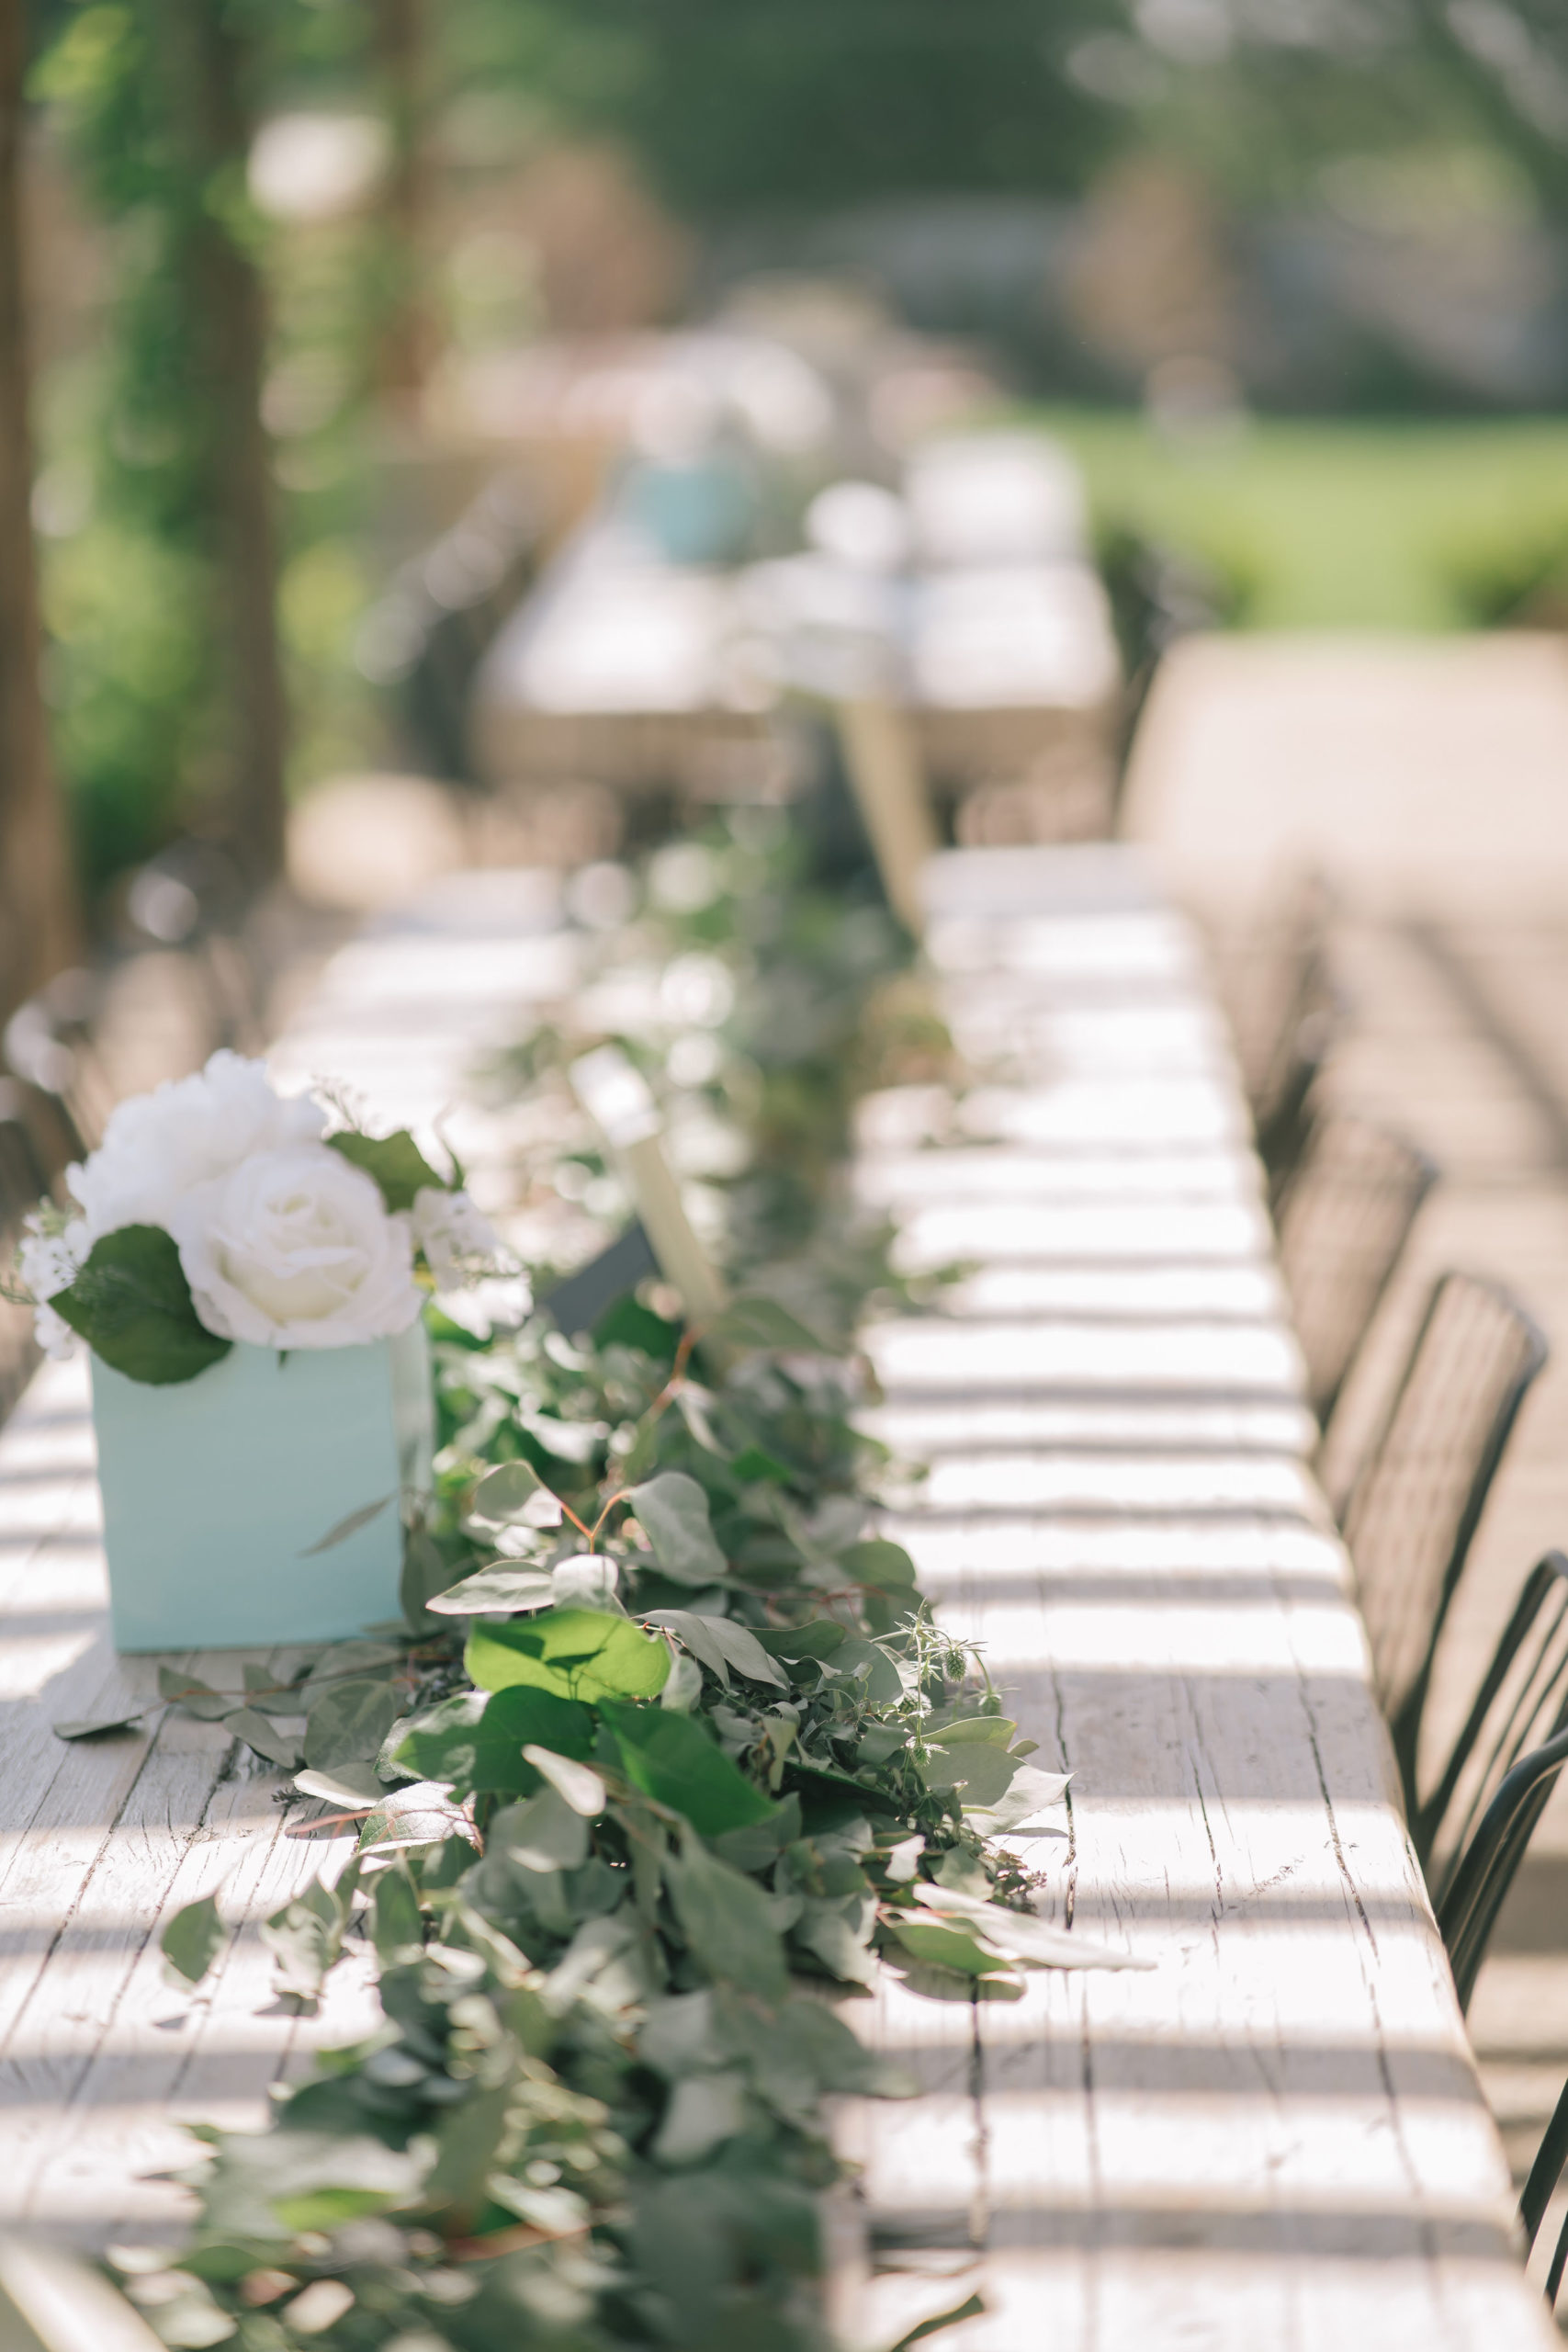 stunning out door table set up for a wedding day in ITaly with greenery and white florals